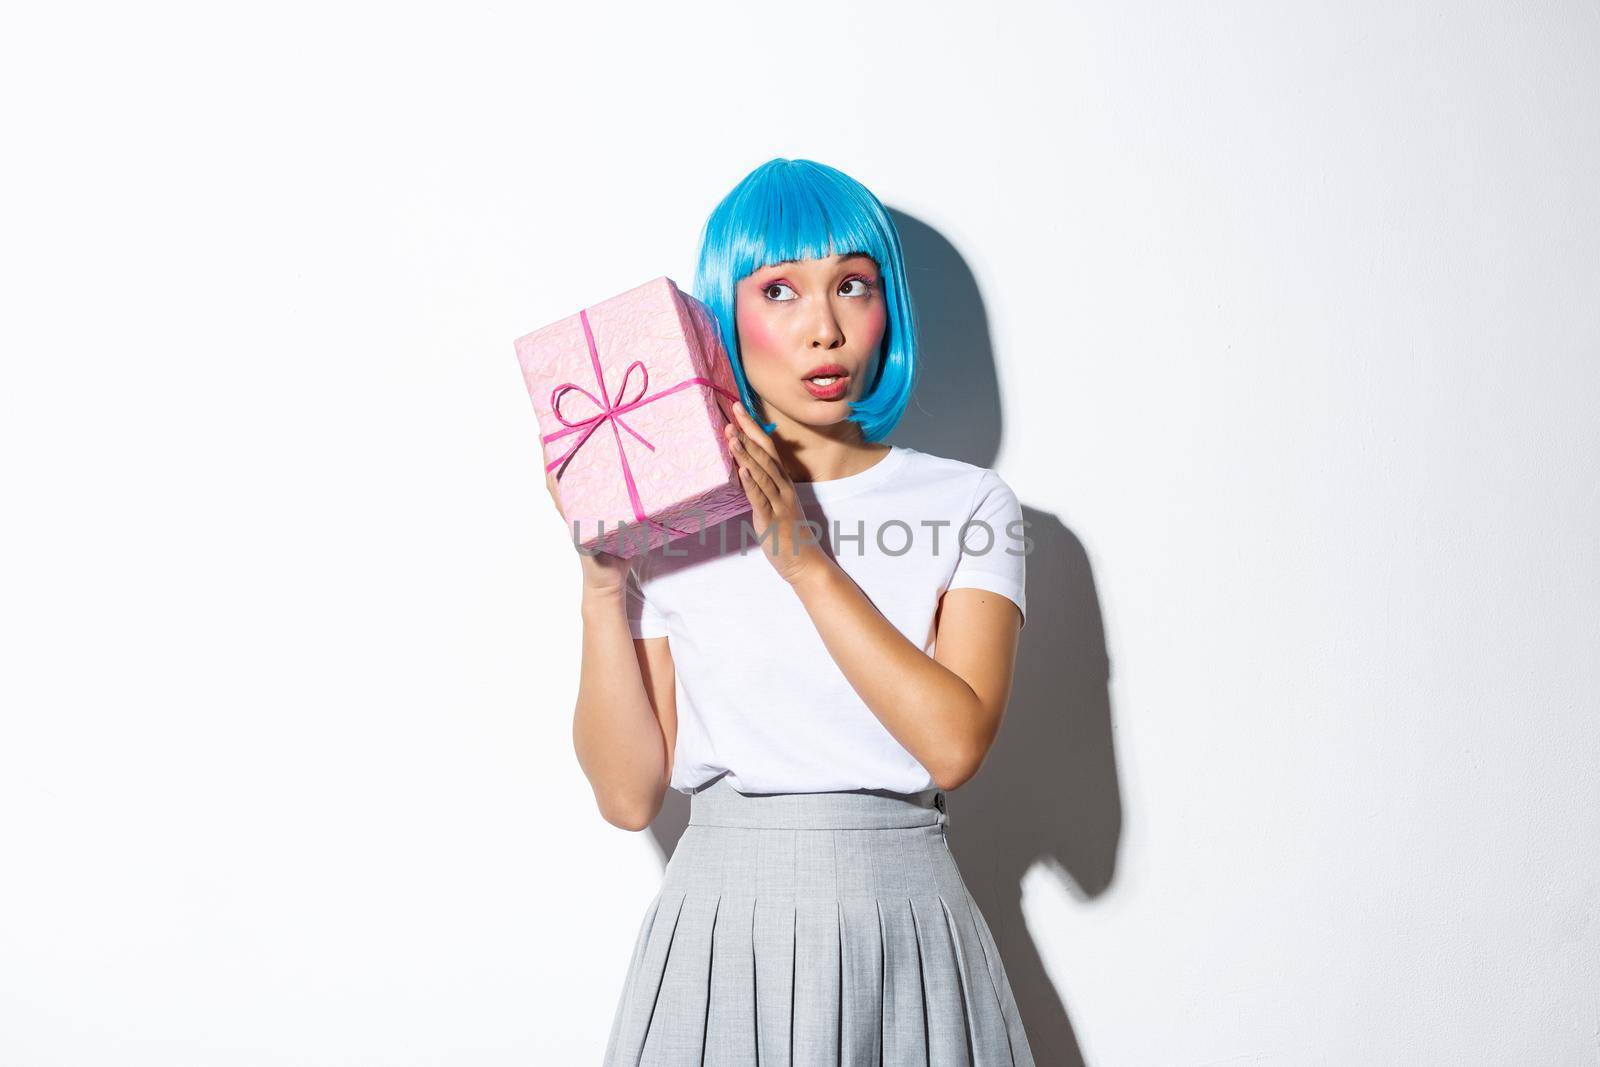 Cute asian girl in blue wig shaking box with gift, wonder whats inside, standing over white background.